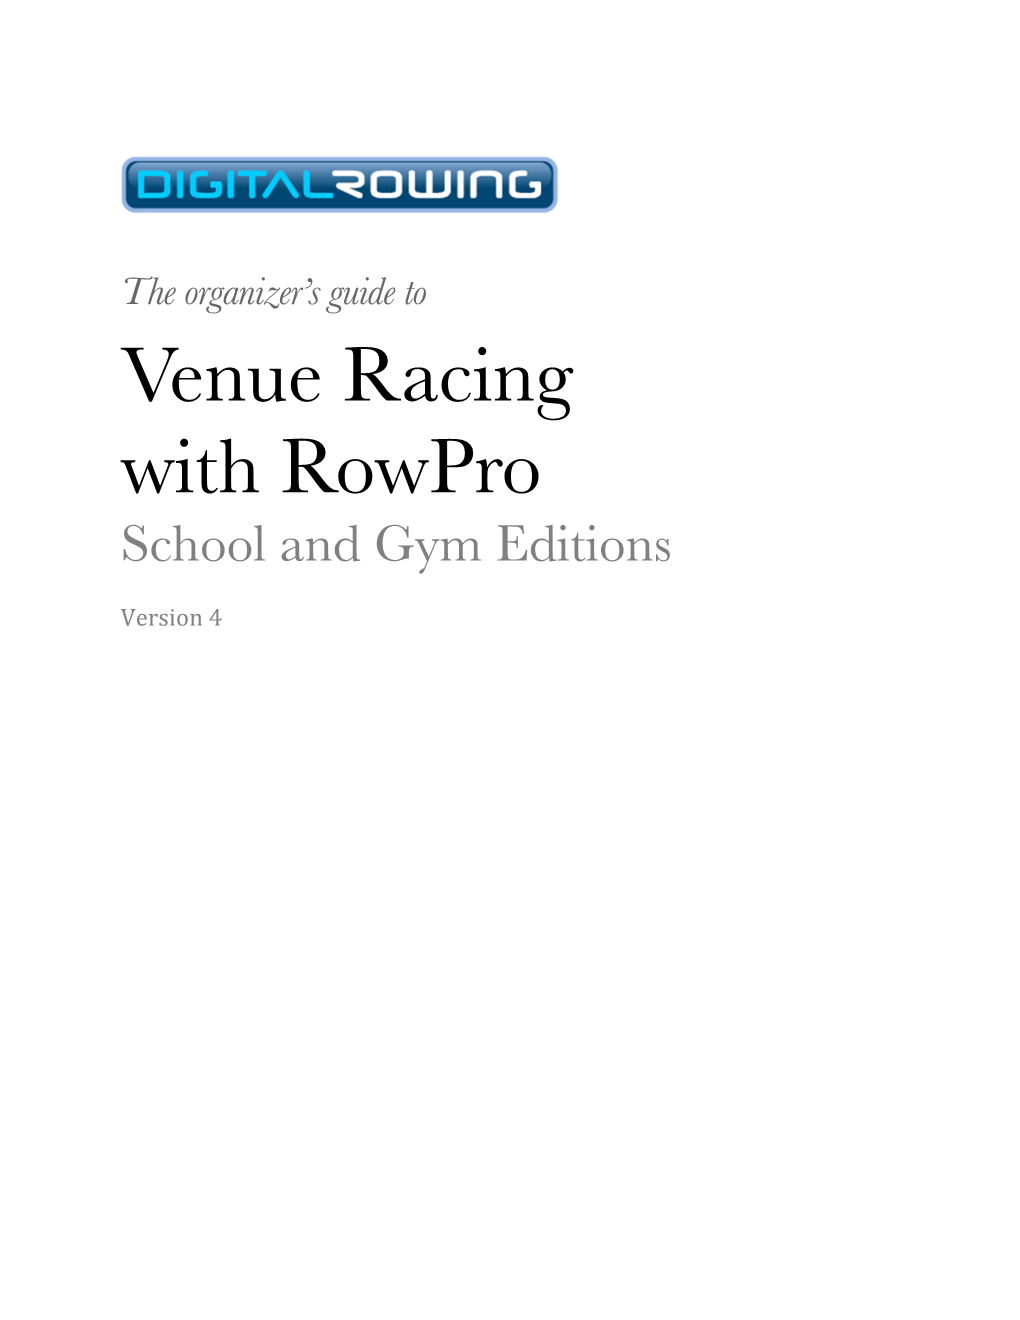 Venue Racing with Rowpro School and Gym Editions